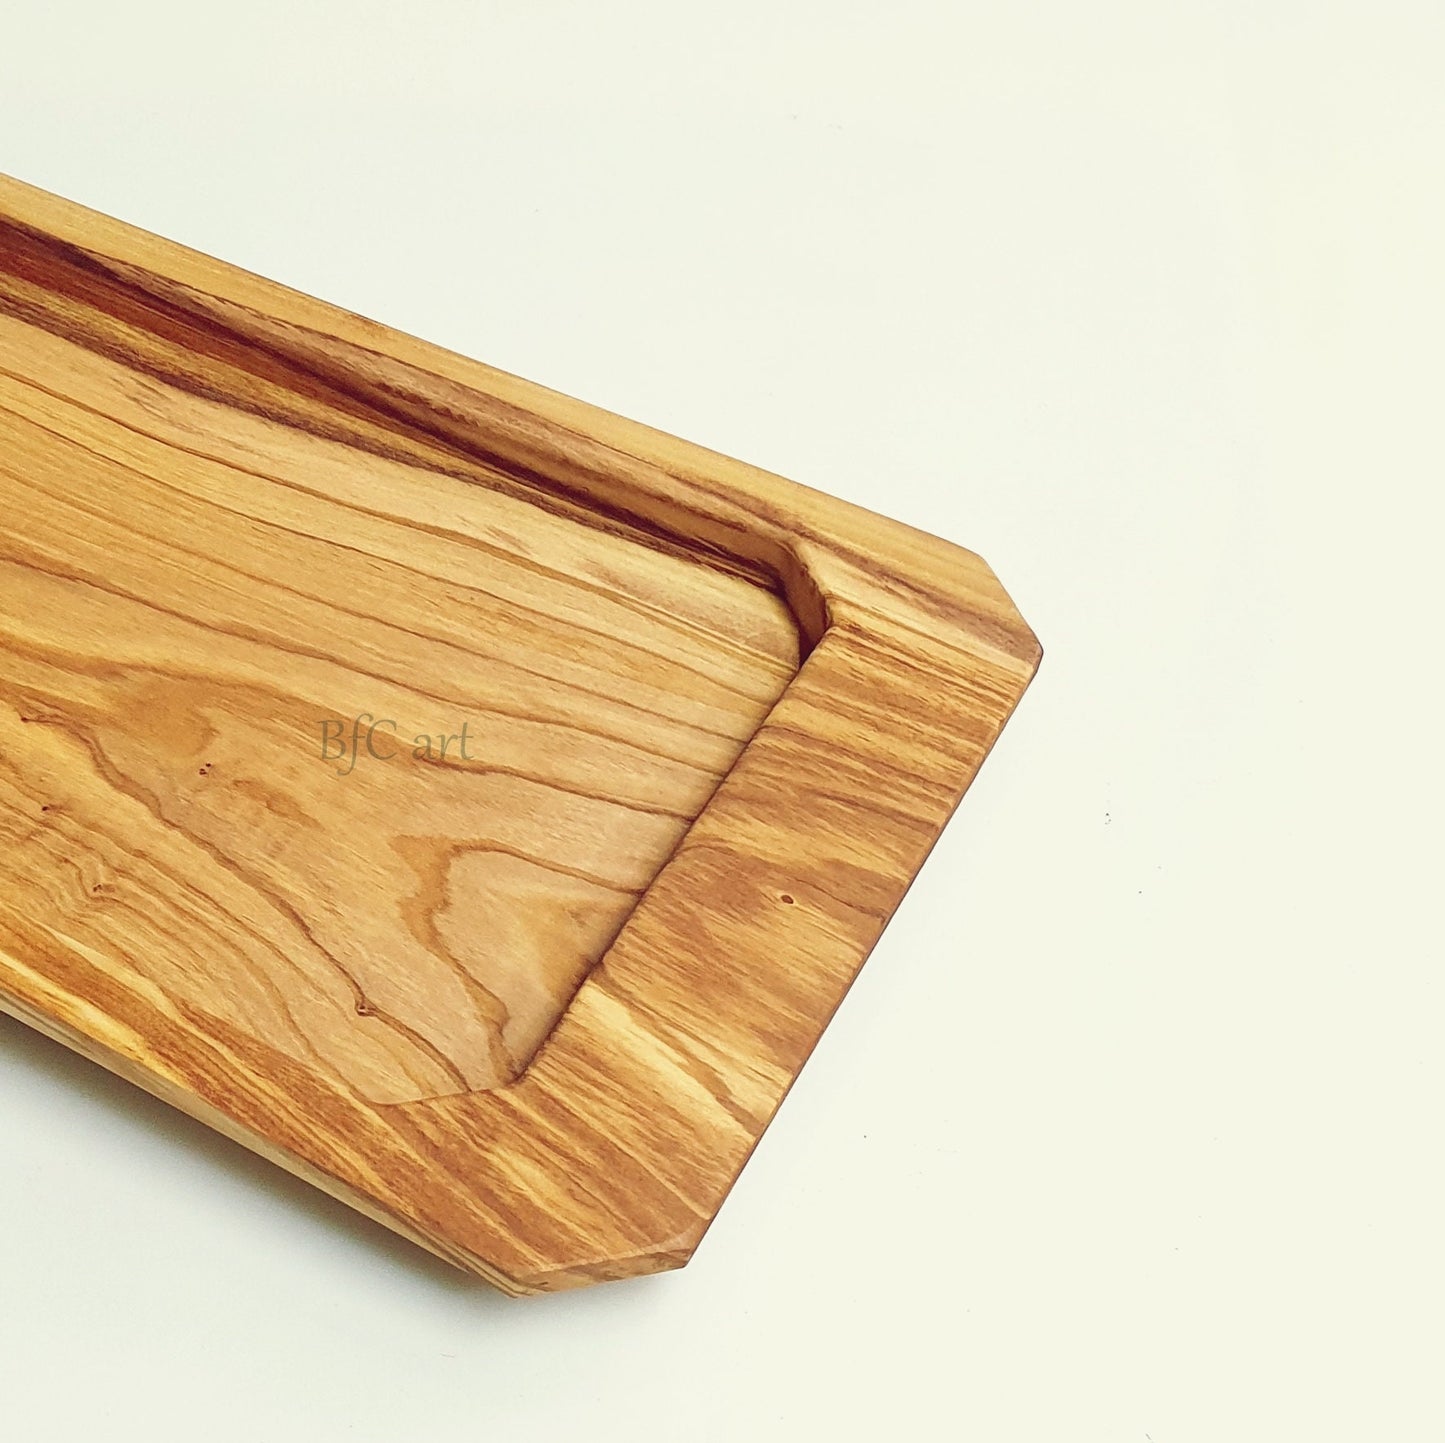 Olive Wood Serving Tray, Lunch Plate, Olive Wood Food Plate, Long Wooden Tray, Tea Coffee Biscuit Board, Meat & Fruit Tray, Cheese Tray Wood